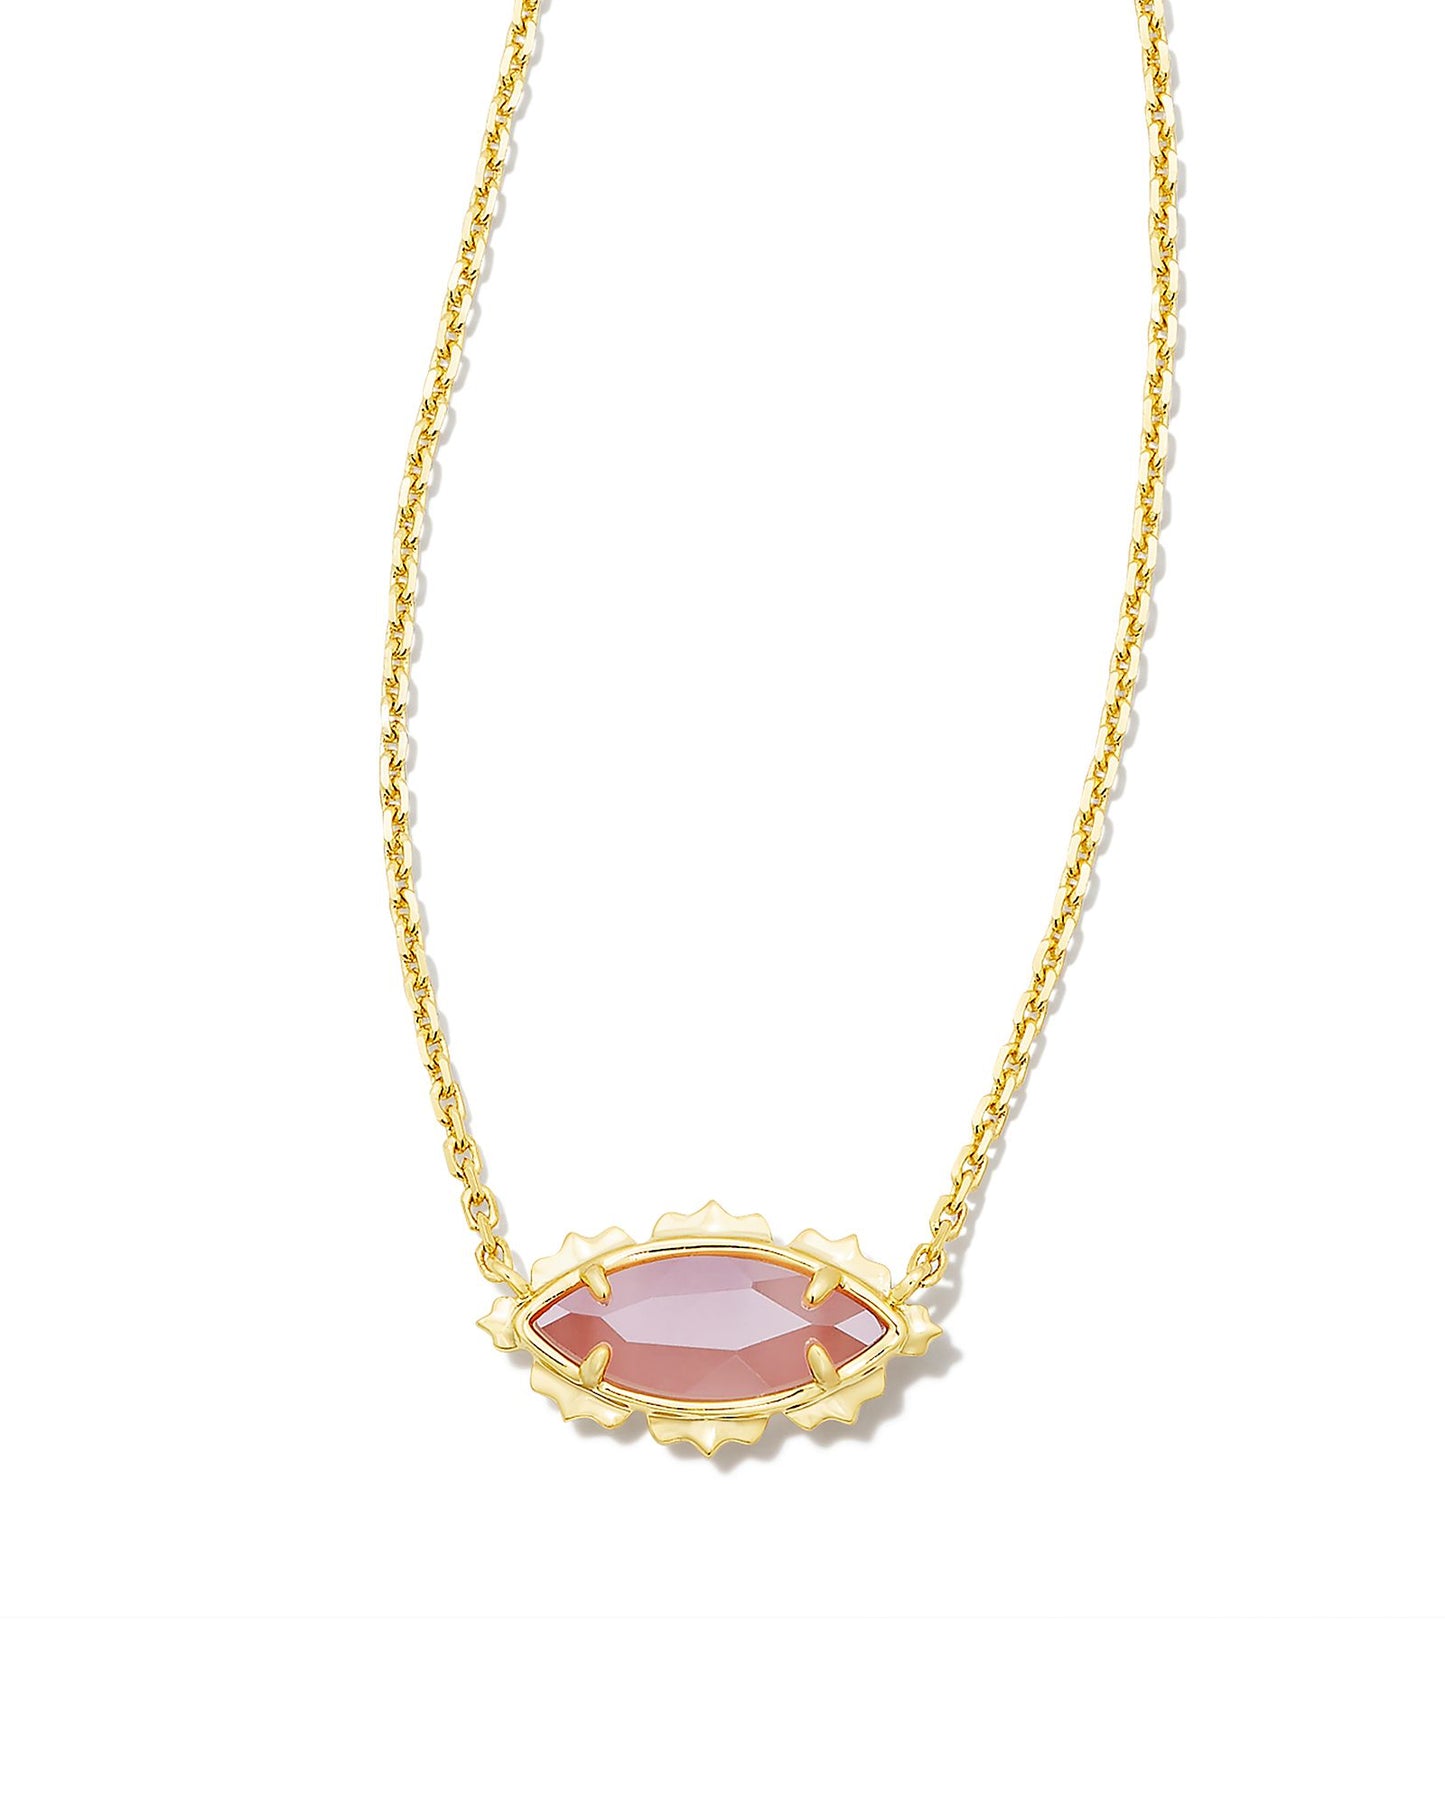 Genevieve Gold Short Necklace | Luster Plated Pink Cat's Eye